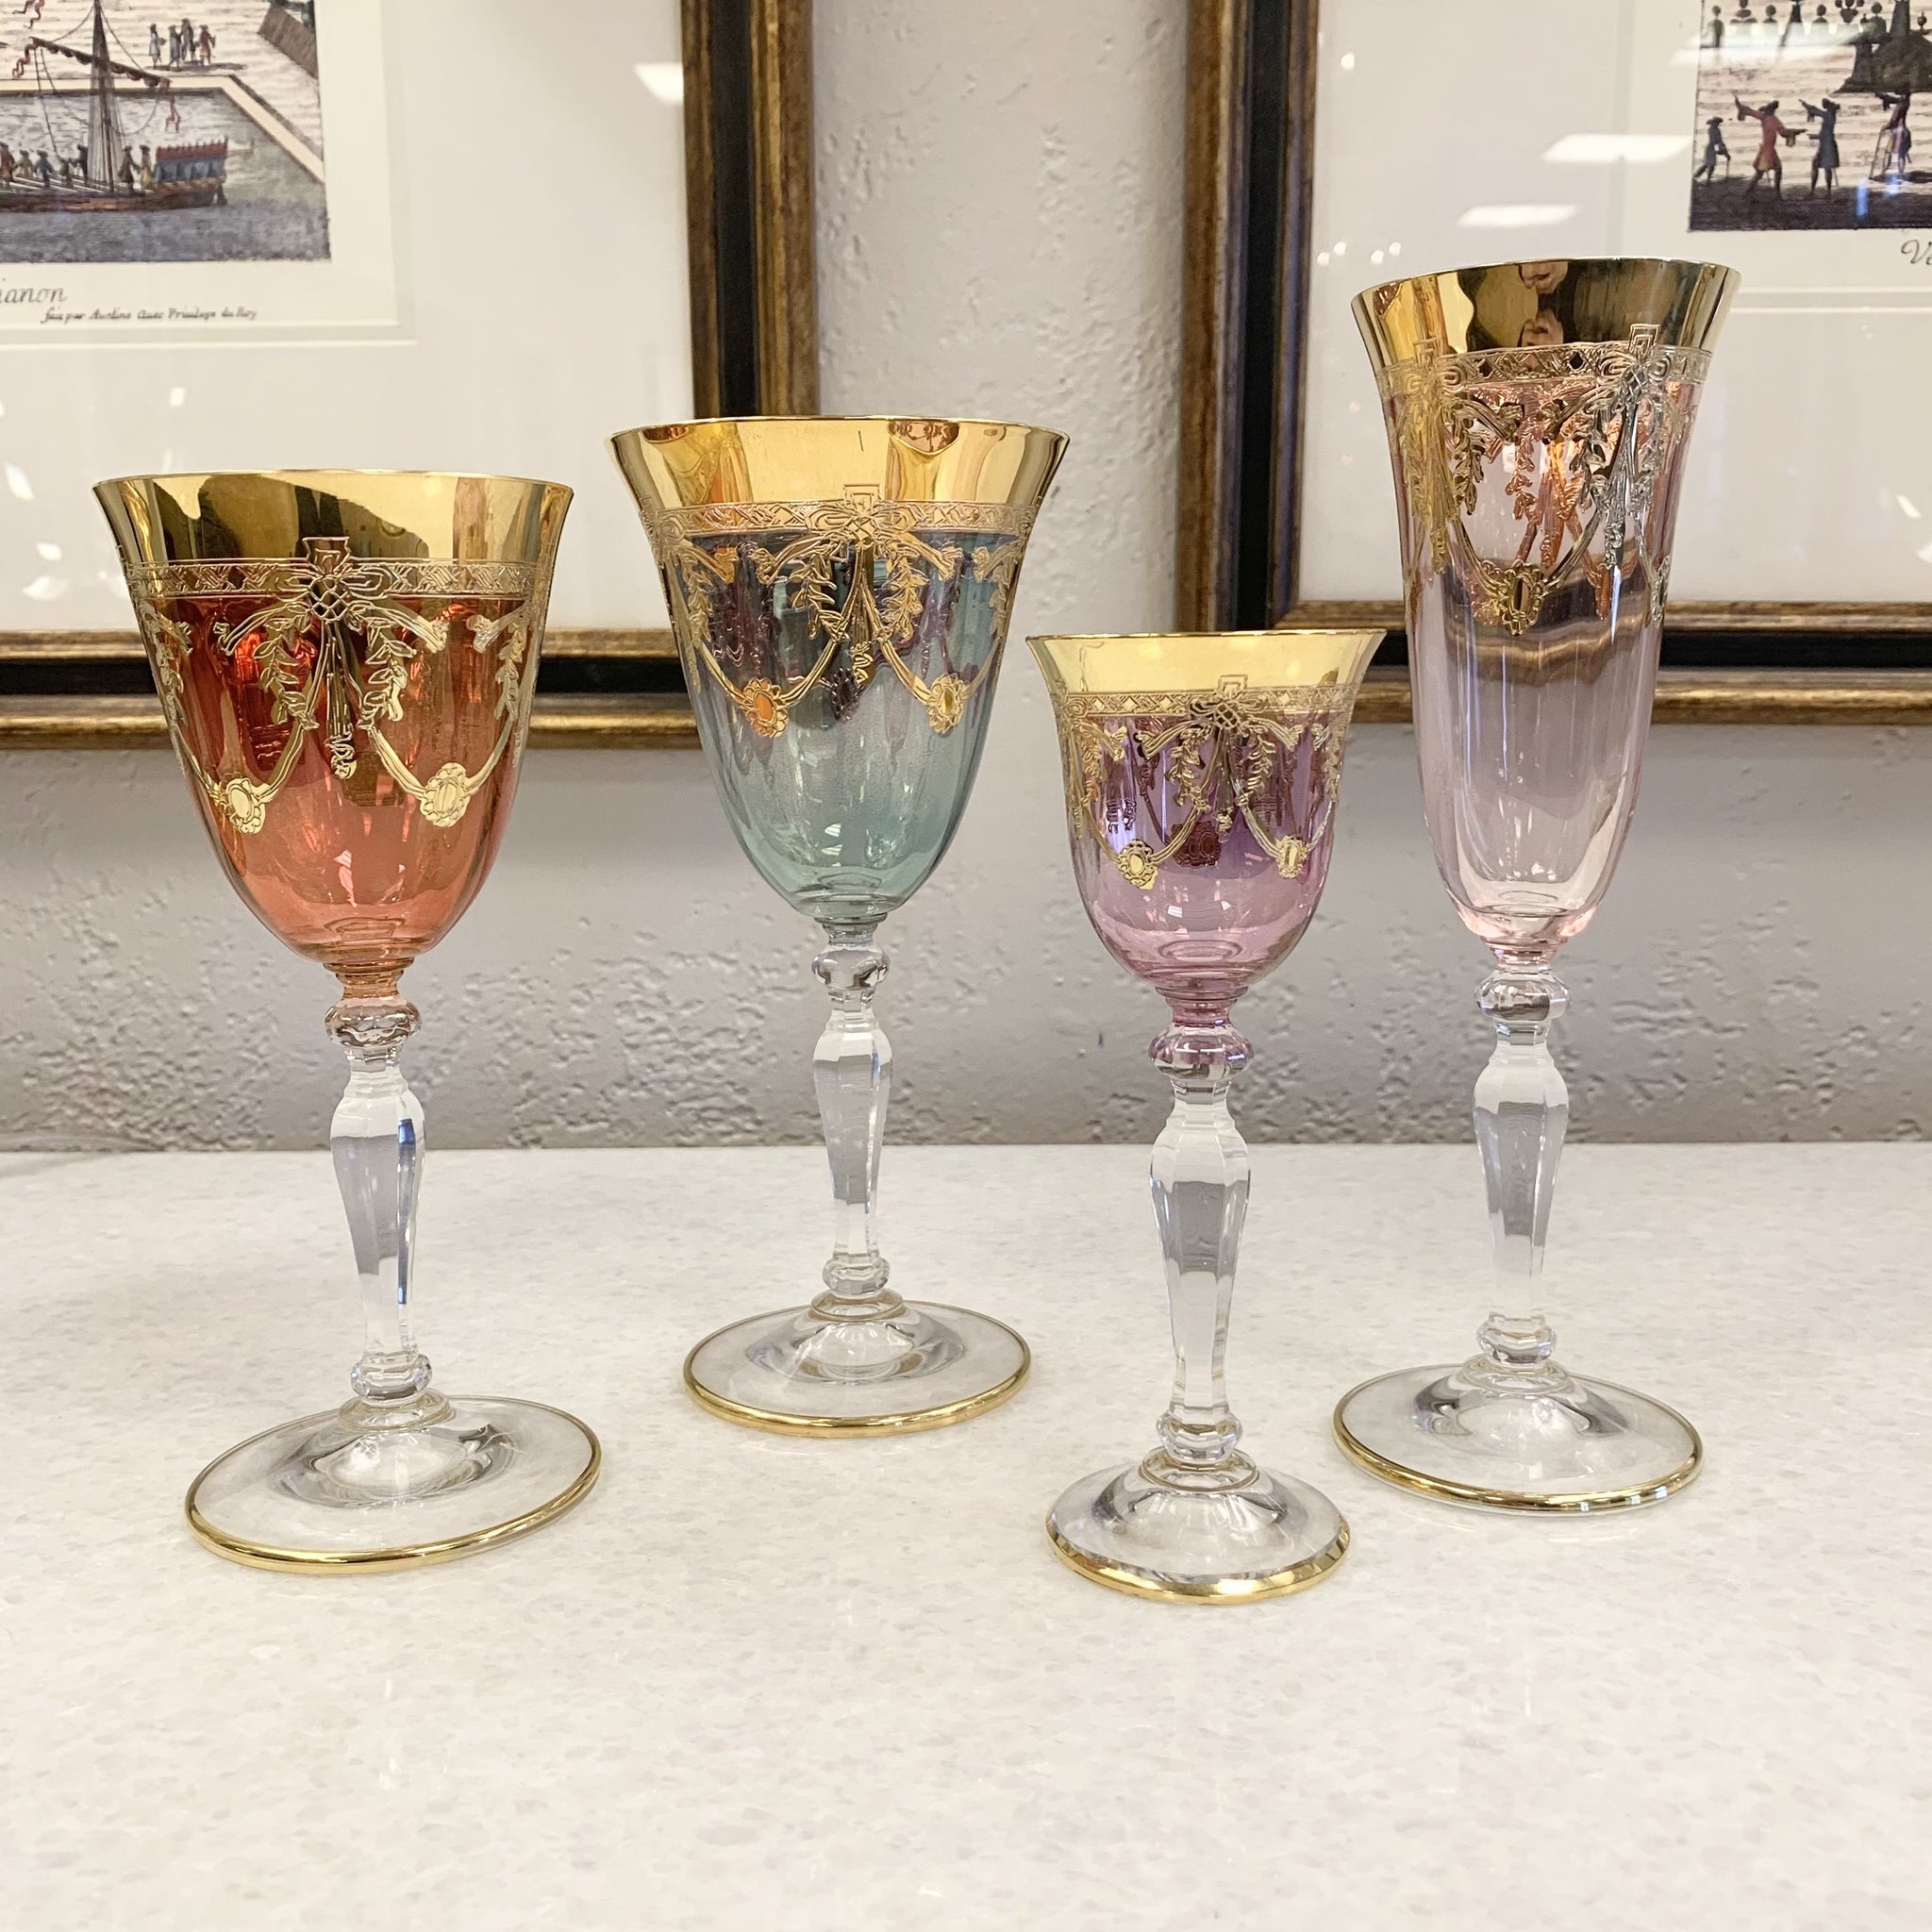 Imported 4 Piece Multi Colored Non-Lead Crystal Stemware Set (Made in Italy)